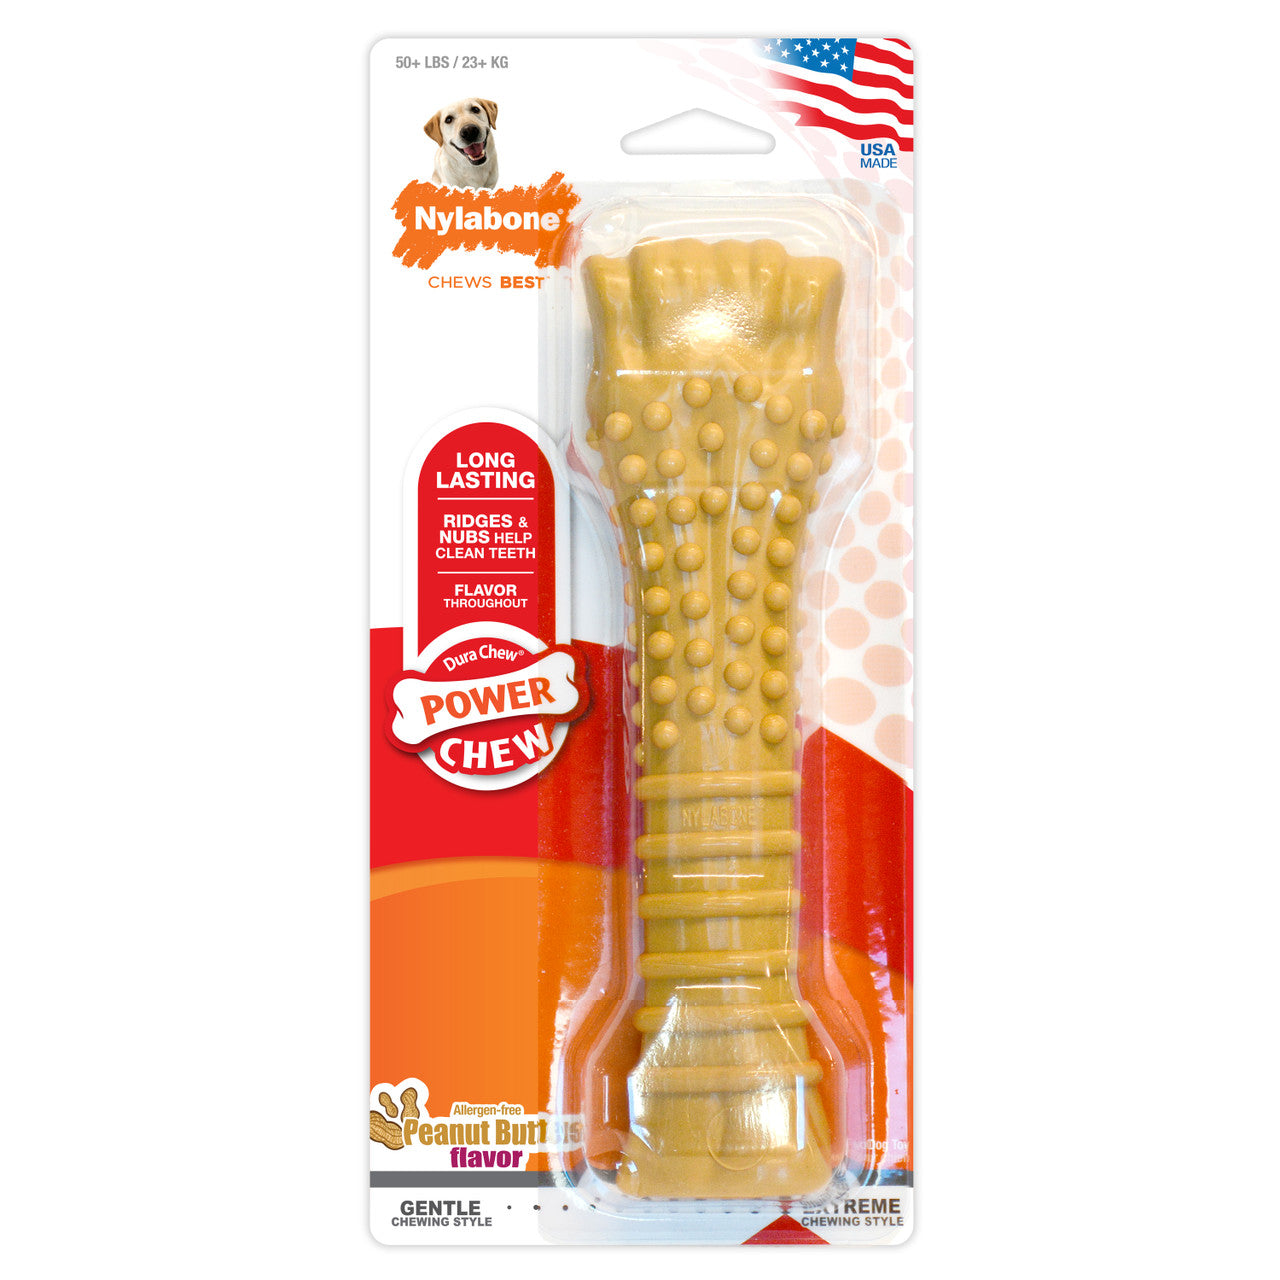 Nylabone Power Chew Durable Dog Toy Peanut Butter X-Large/Souper (1 Count)